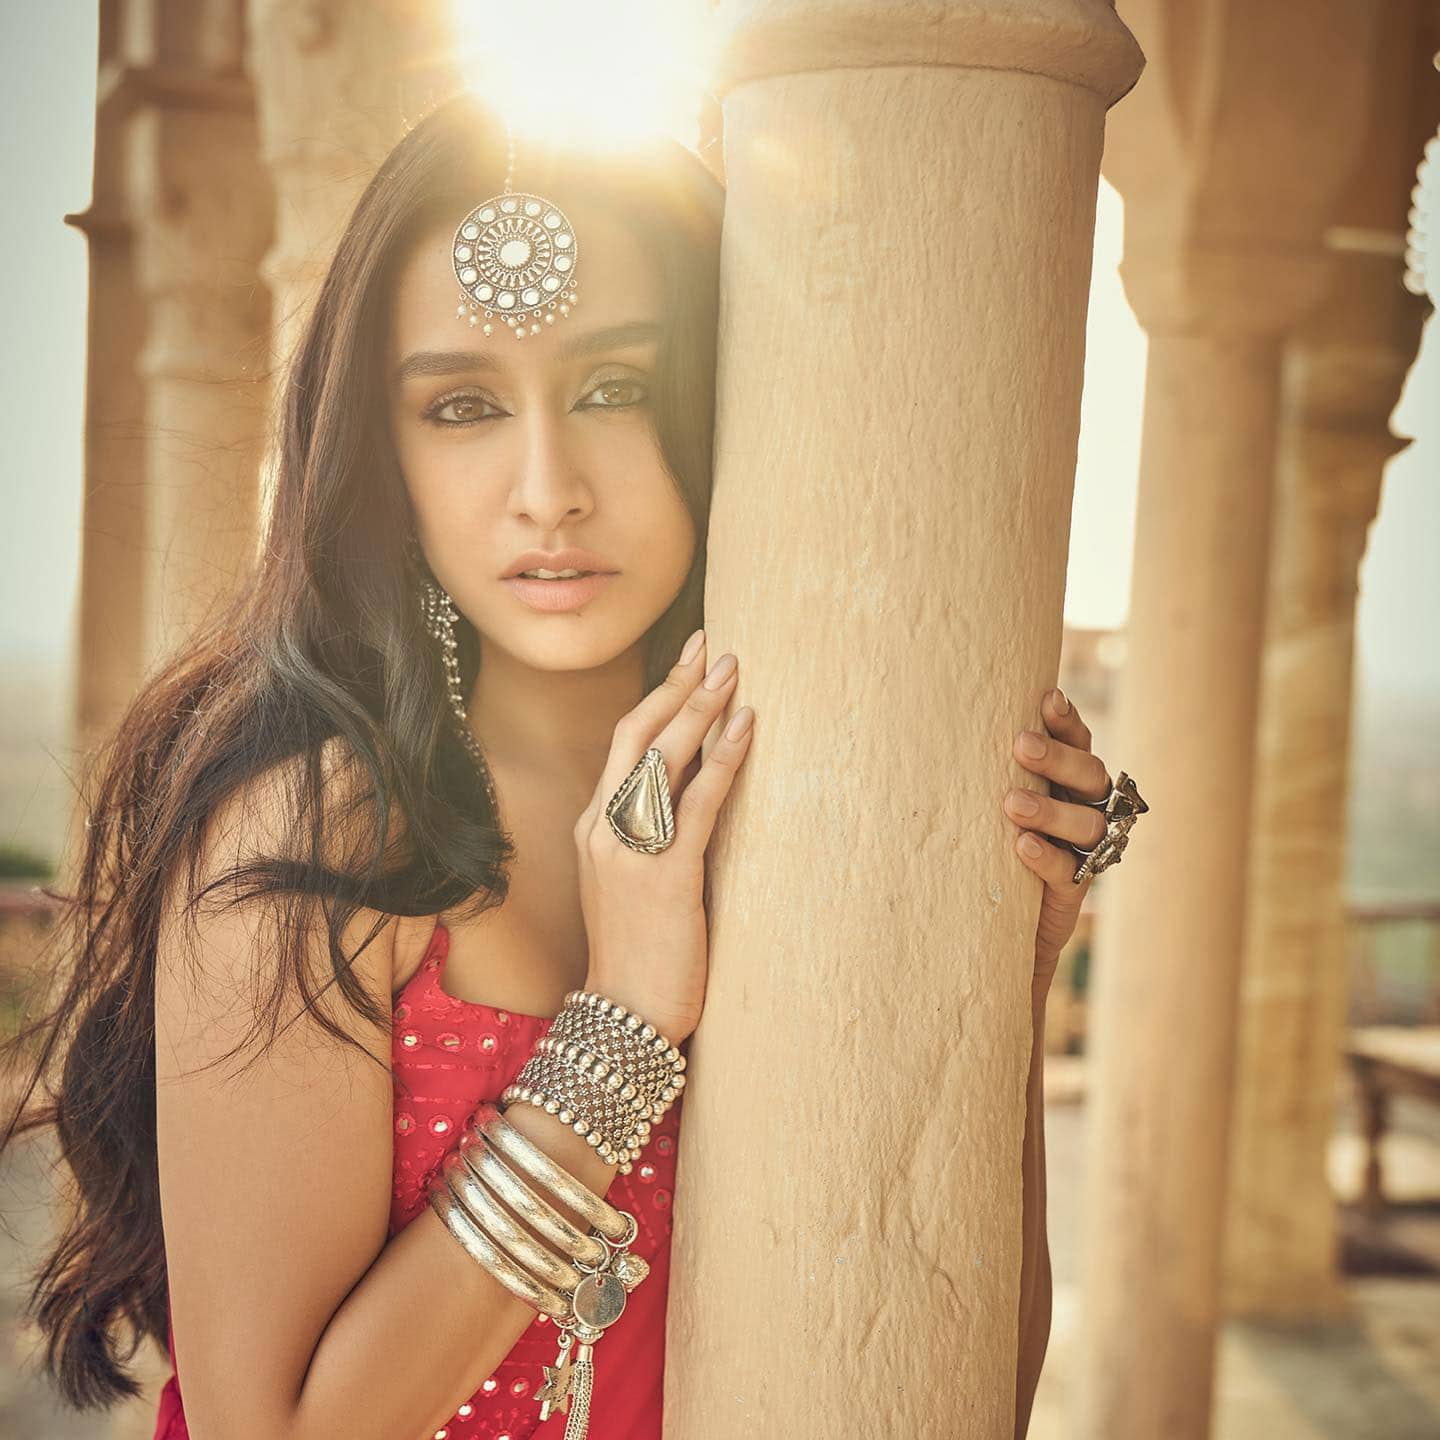 Shraddha Kapoor's photoshoot for a clothing brand